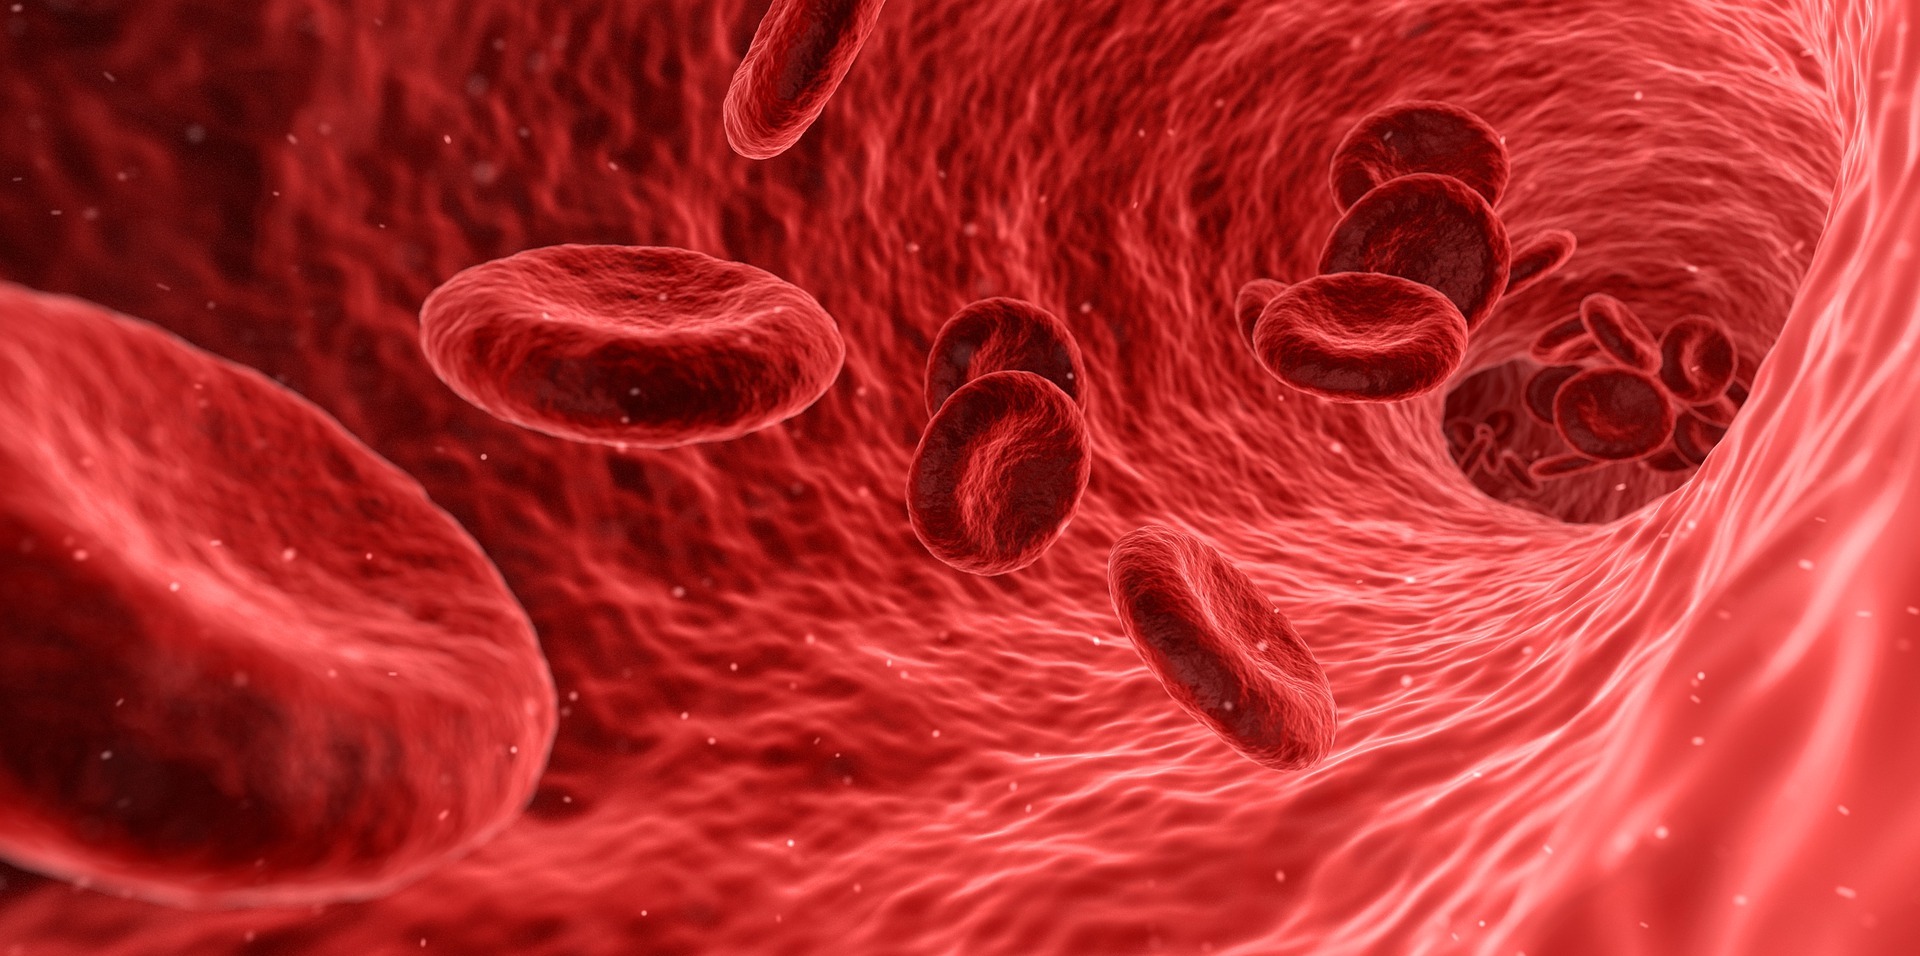 Researchers are masking medicines to flow alongside red blood cells and avoid the body's defense systems.